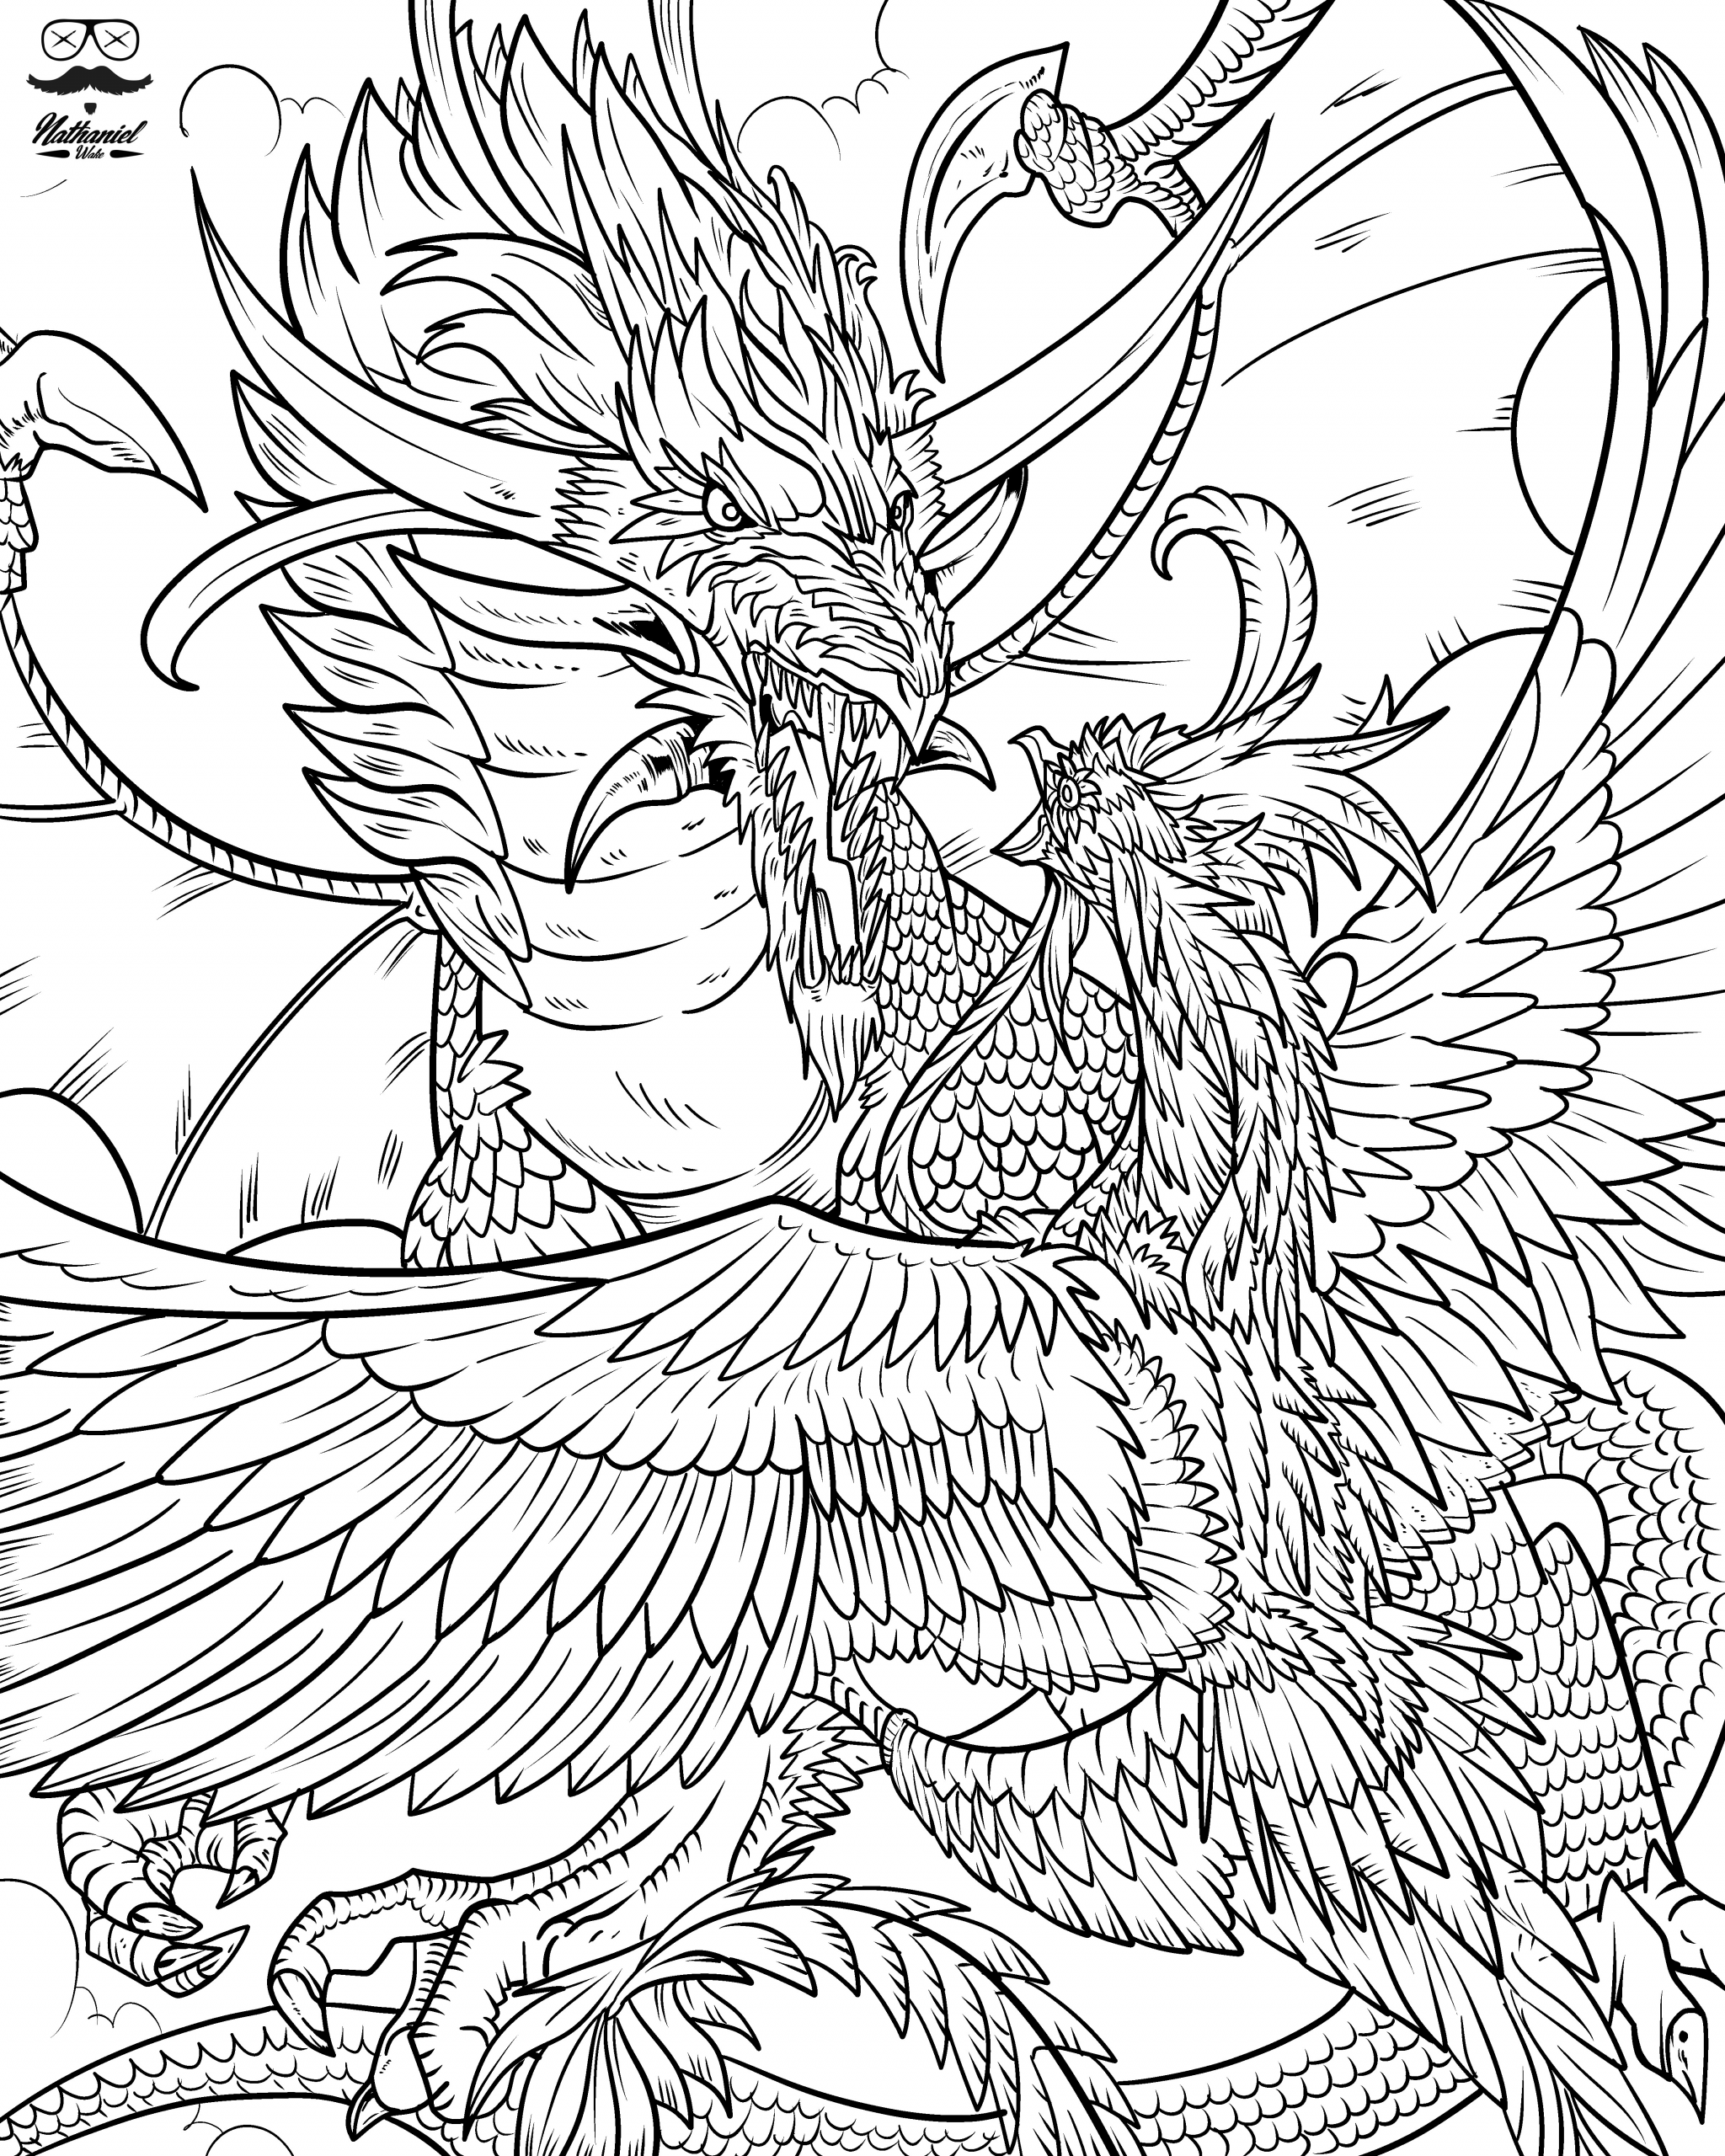 Dragon Coloring Books For Adults
 Pin on Dragon Coloring Book Dragonlife